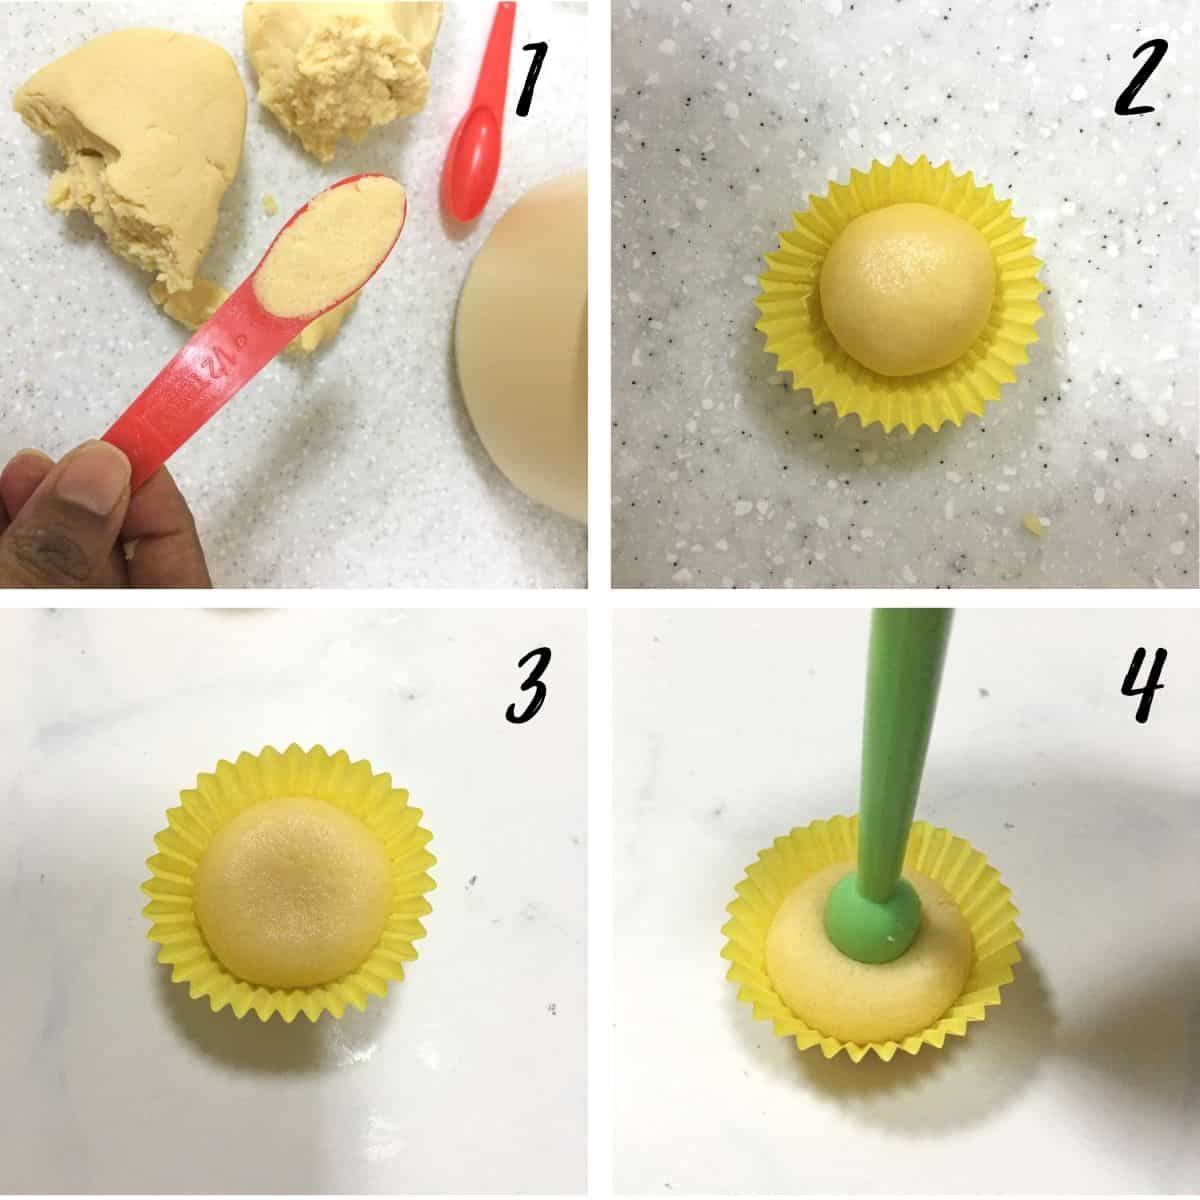 A poster of 4 images showing how to scoop the shortbread cookies dough, how to shape it into a ball, how to use a ball tool to make a dent in the center.